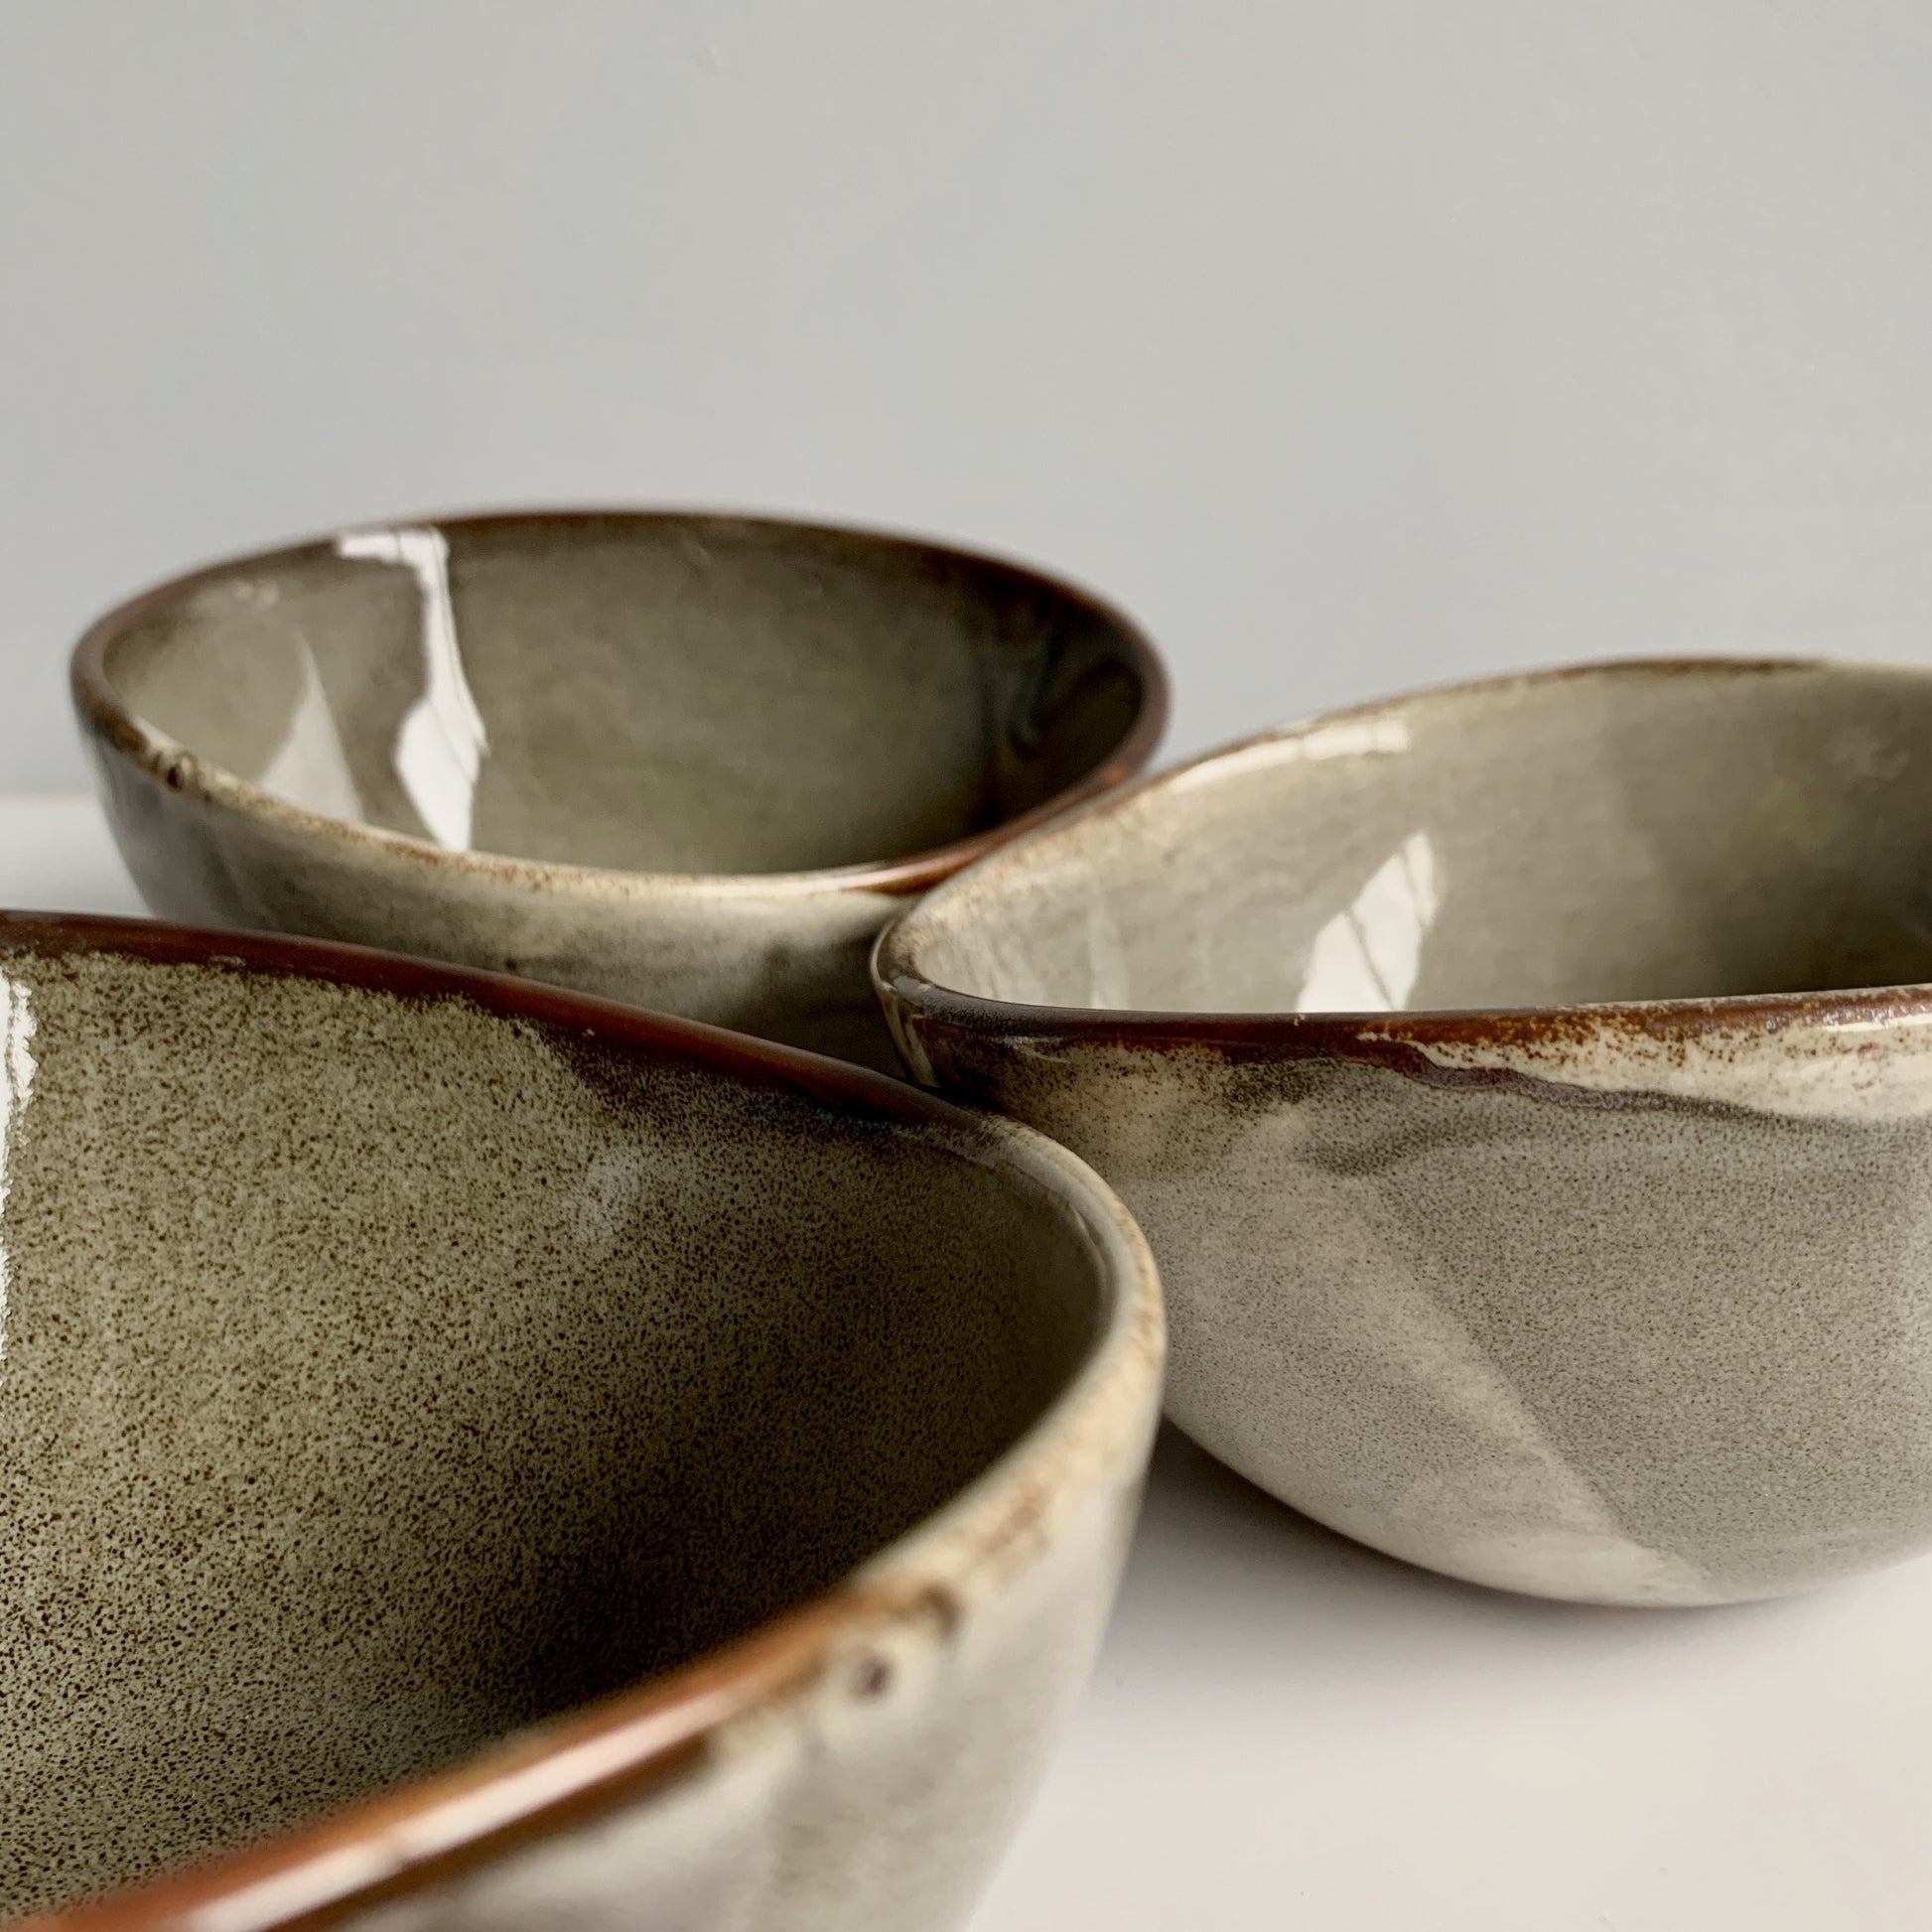 unique asymmetrical dinnerware set - small round rice bowl in grey